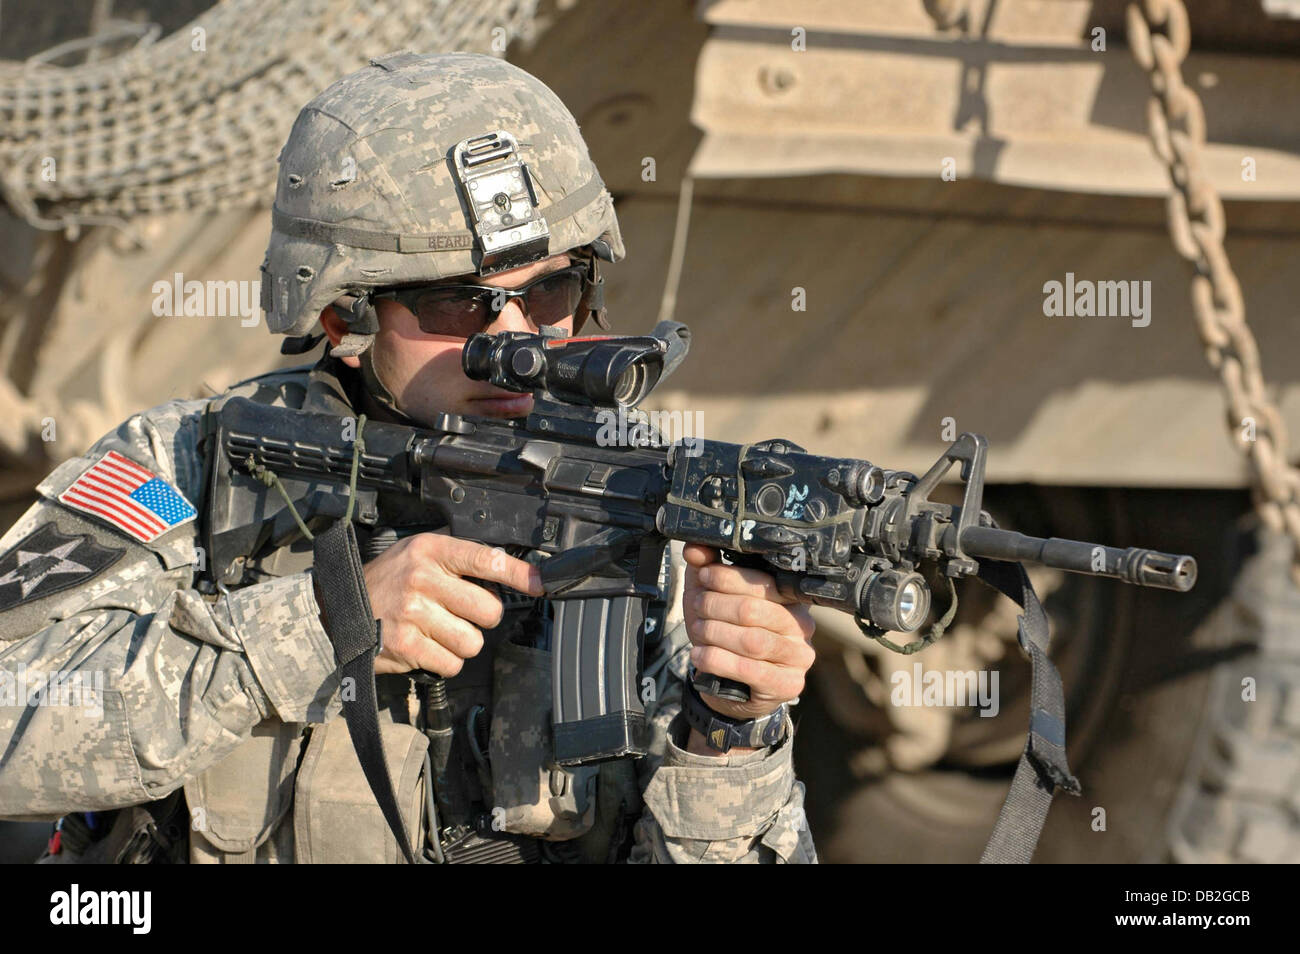 An infantryman of the 3rd US Stryker Brigade Combat Team aims with this M4A1 carbine during a search operation in Bagdad, Iraq, March 2007. The remote controlled Explosive Ordnance Disposal Roboter is used to examine potential improvised explosive device (IED). Photo: Carl Schulze Stock Photo